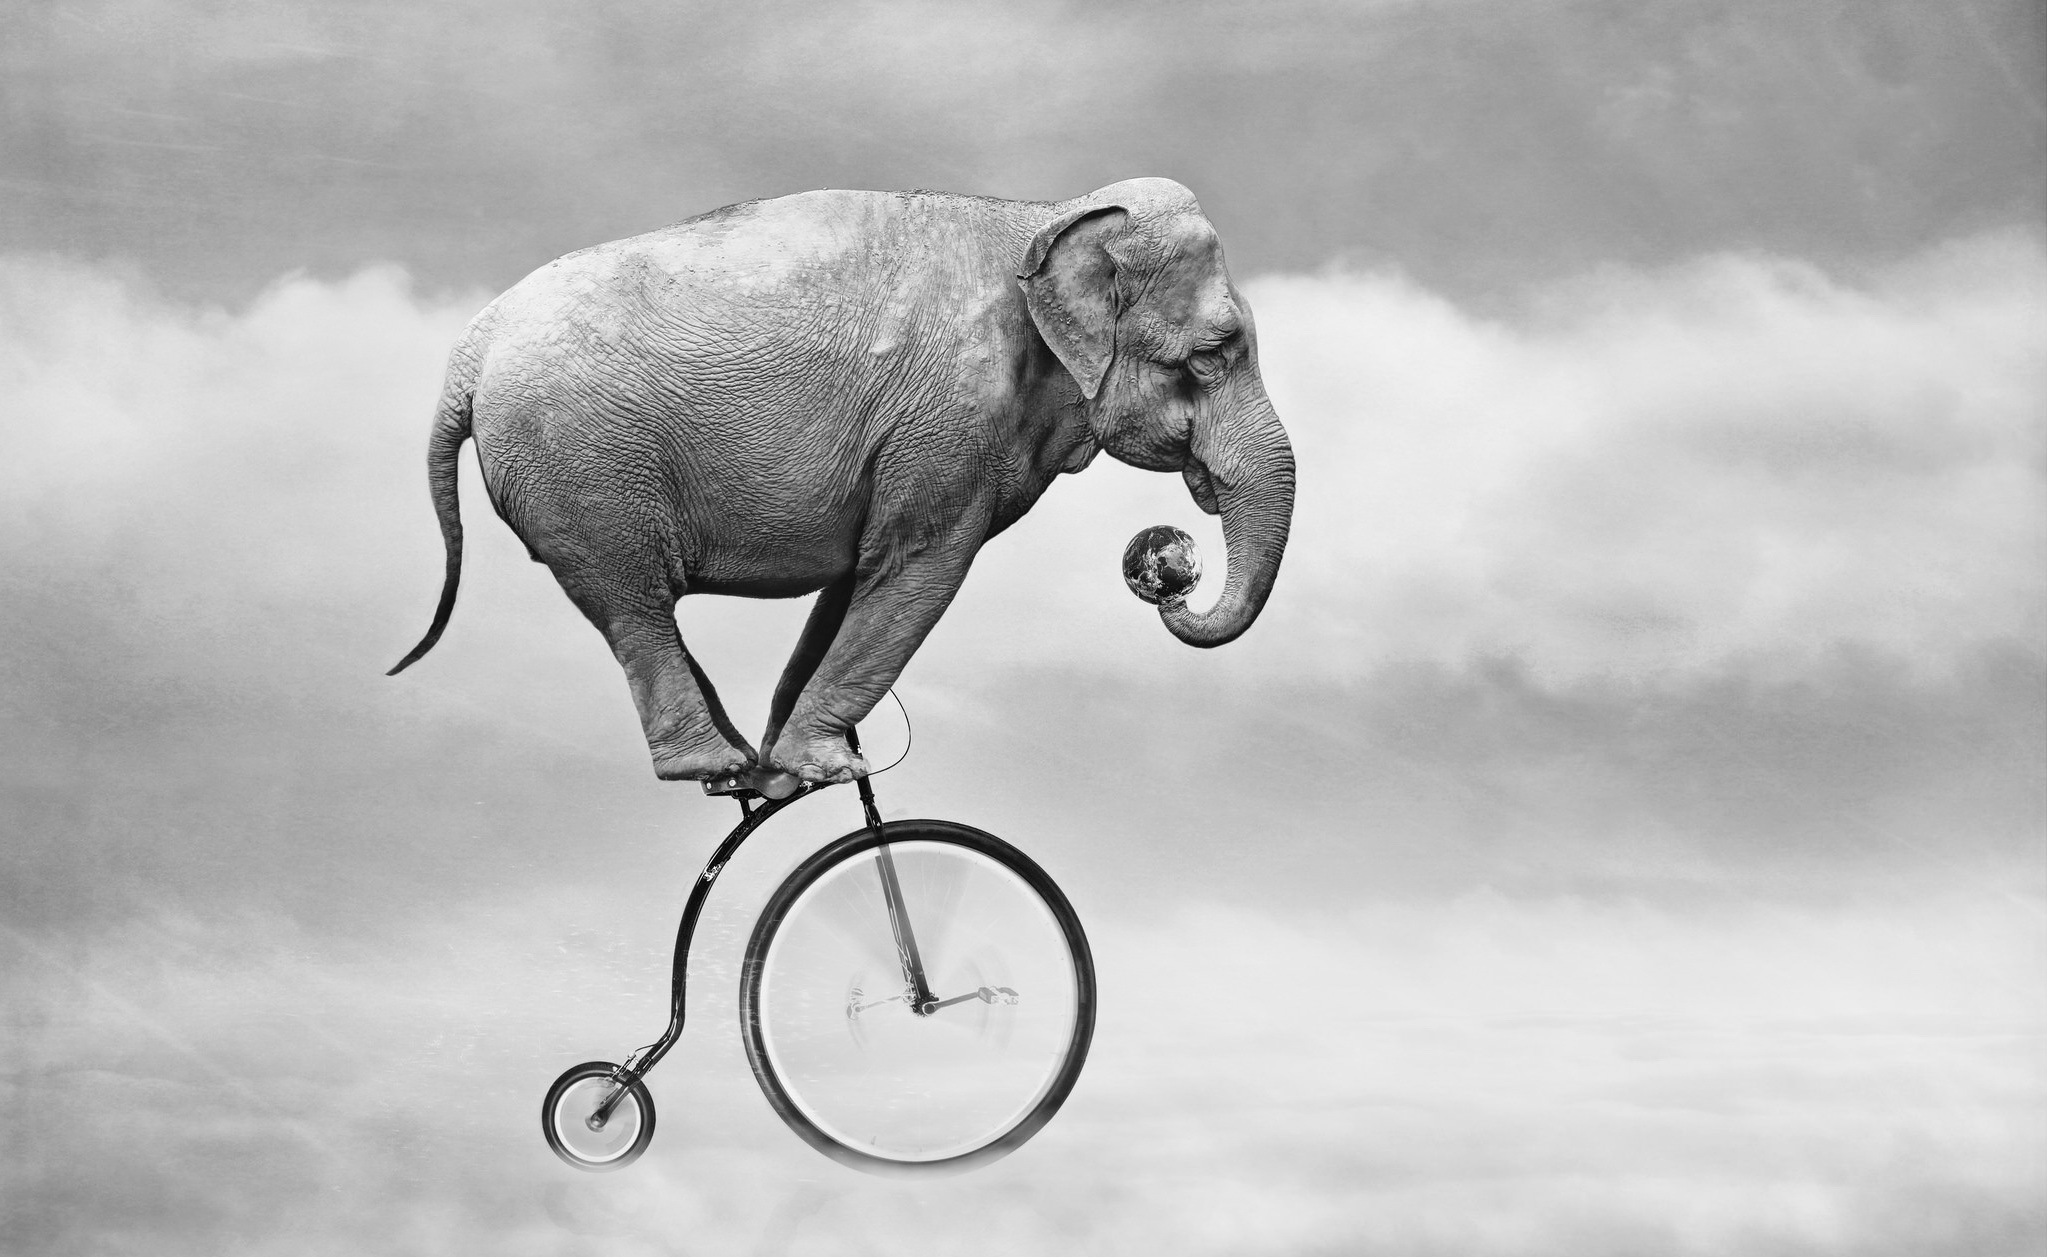 Elephant Riding a Bicycle